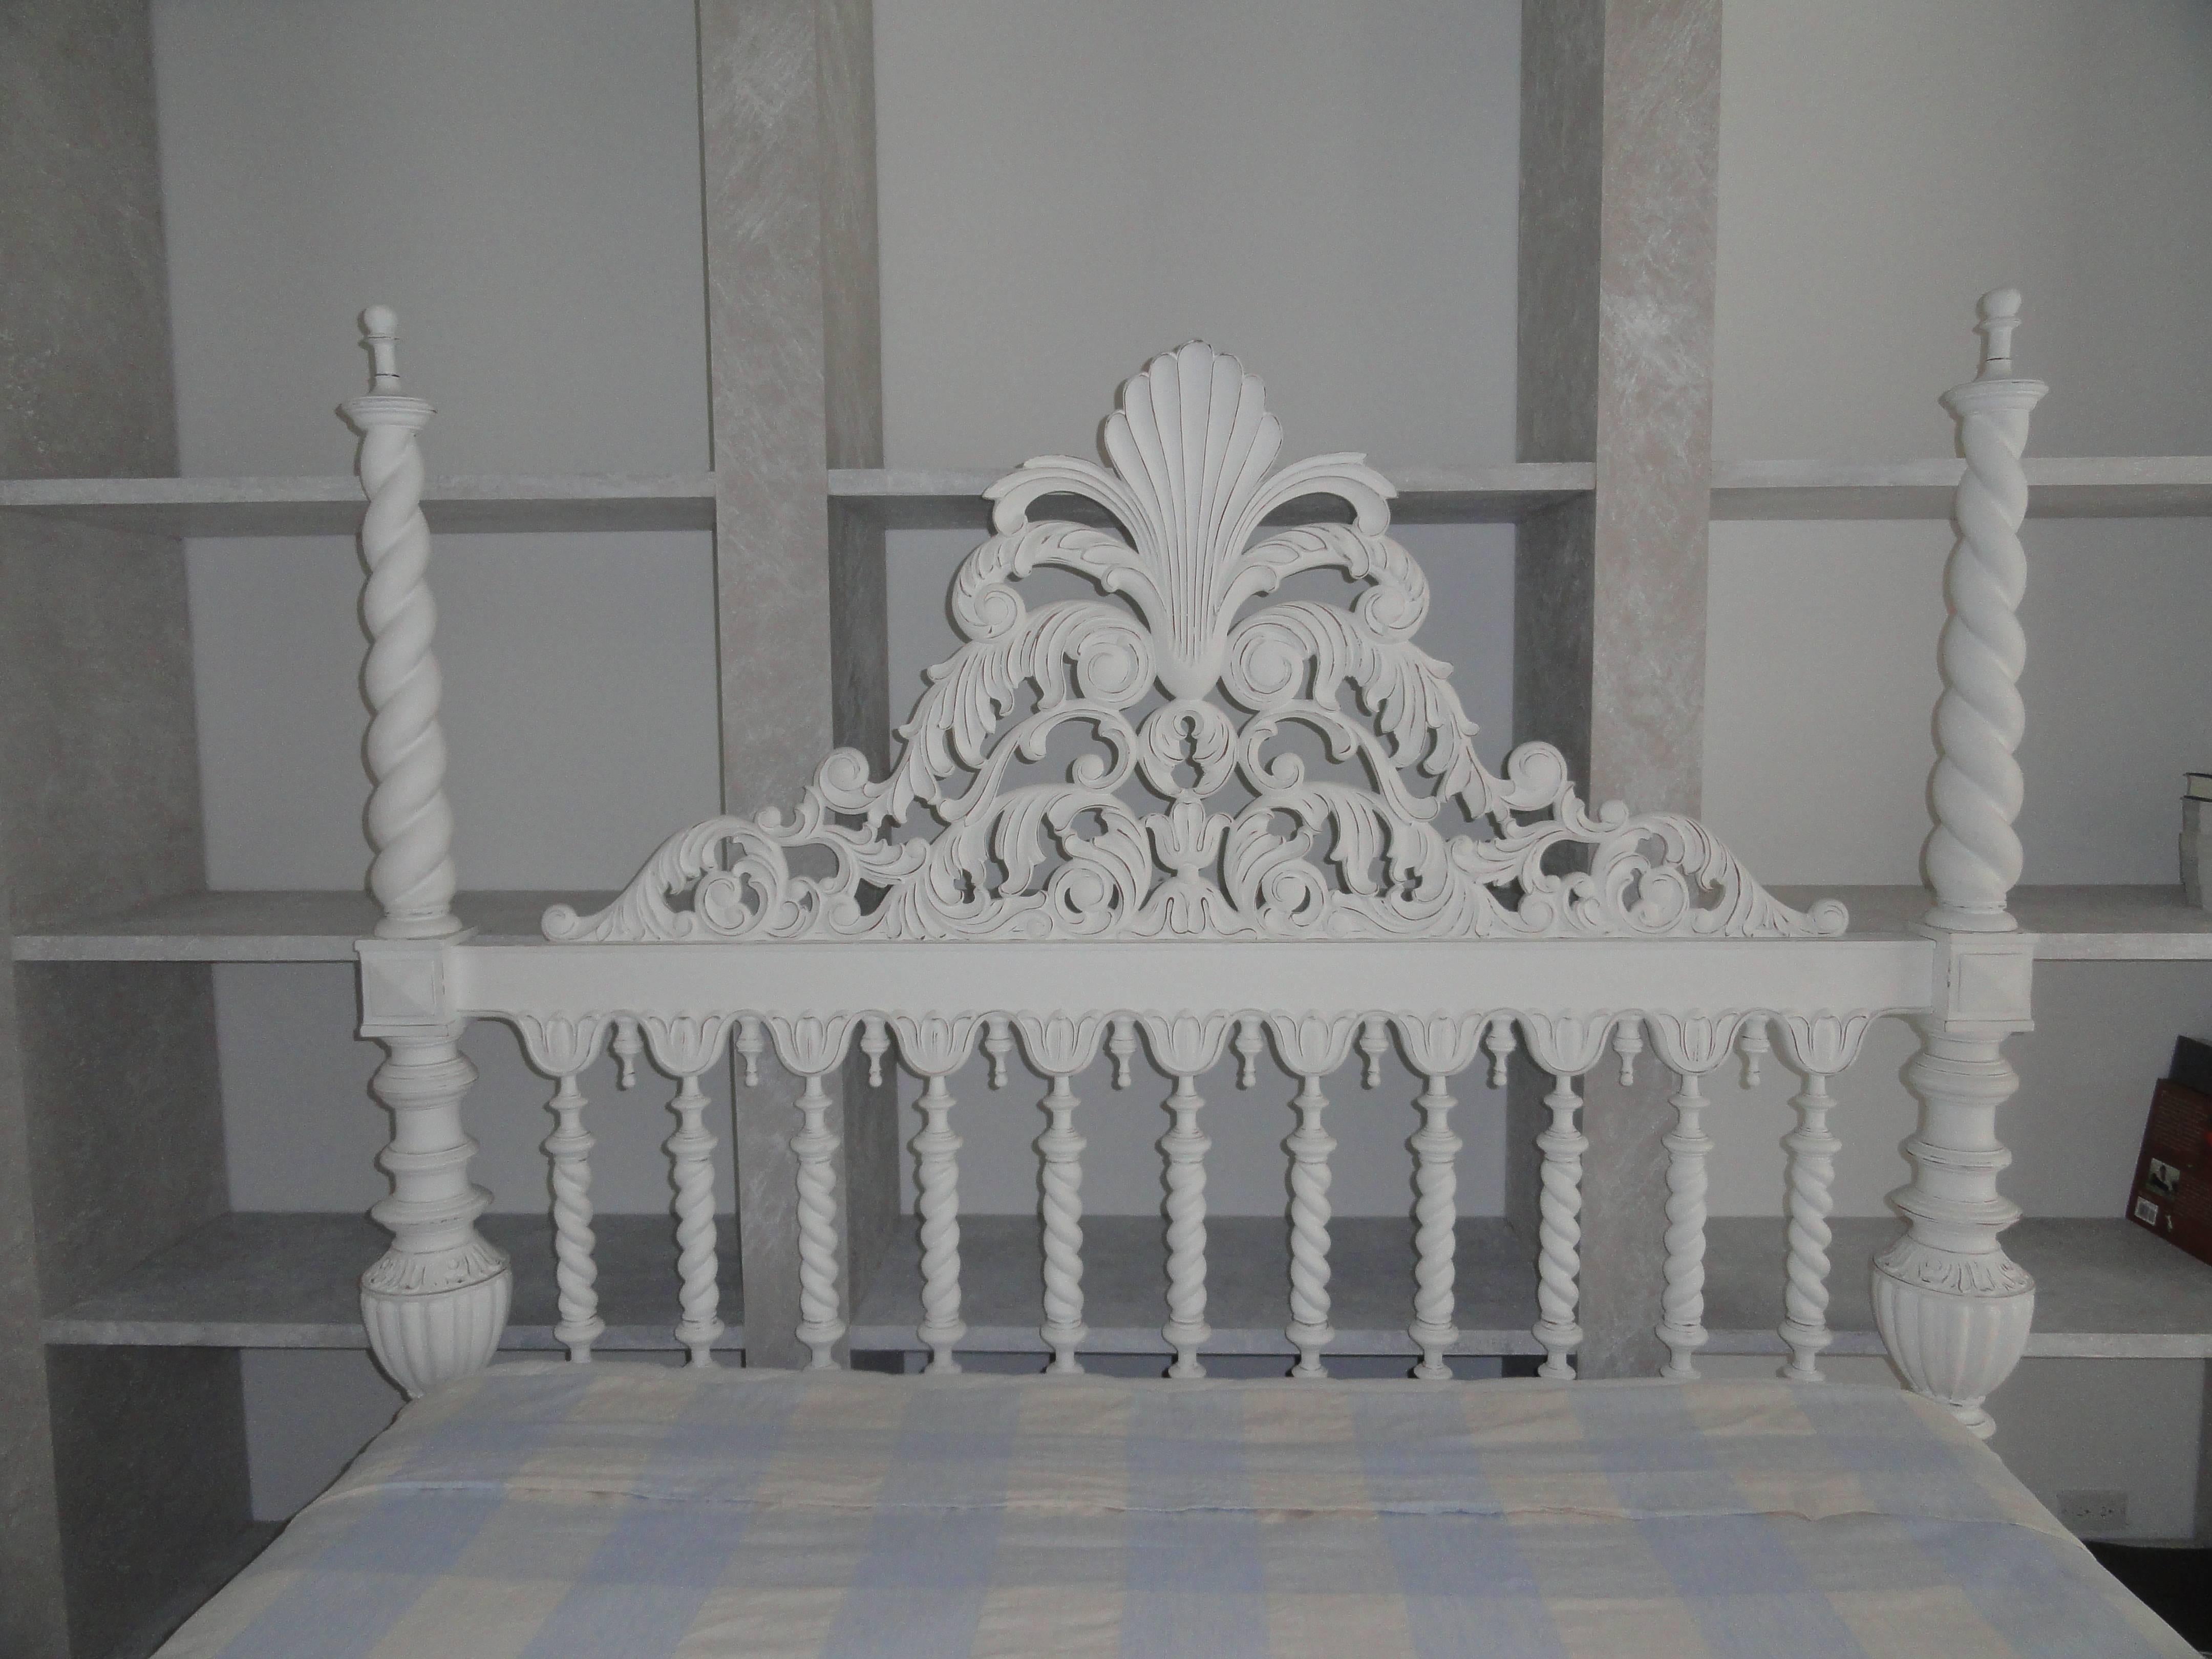 King-size plantation style four-poster wood bed. Head board features twist columns with an elegant carved cartouche. Four posters are carved wood in a twist pattern. Beautiful detail on the base of bed.
Custom white painted finish. Bed frame only.